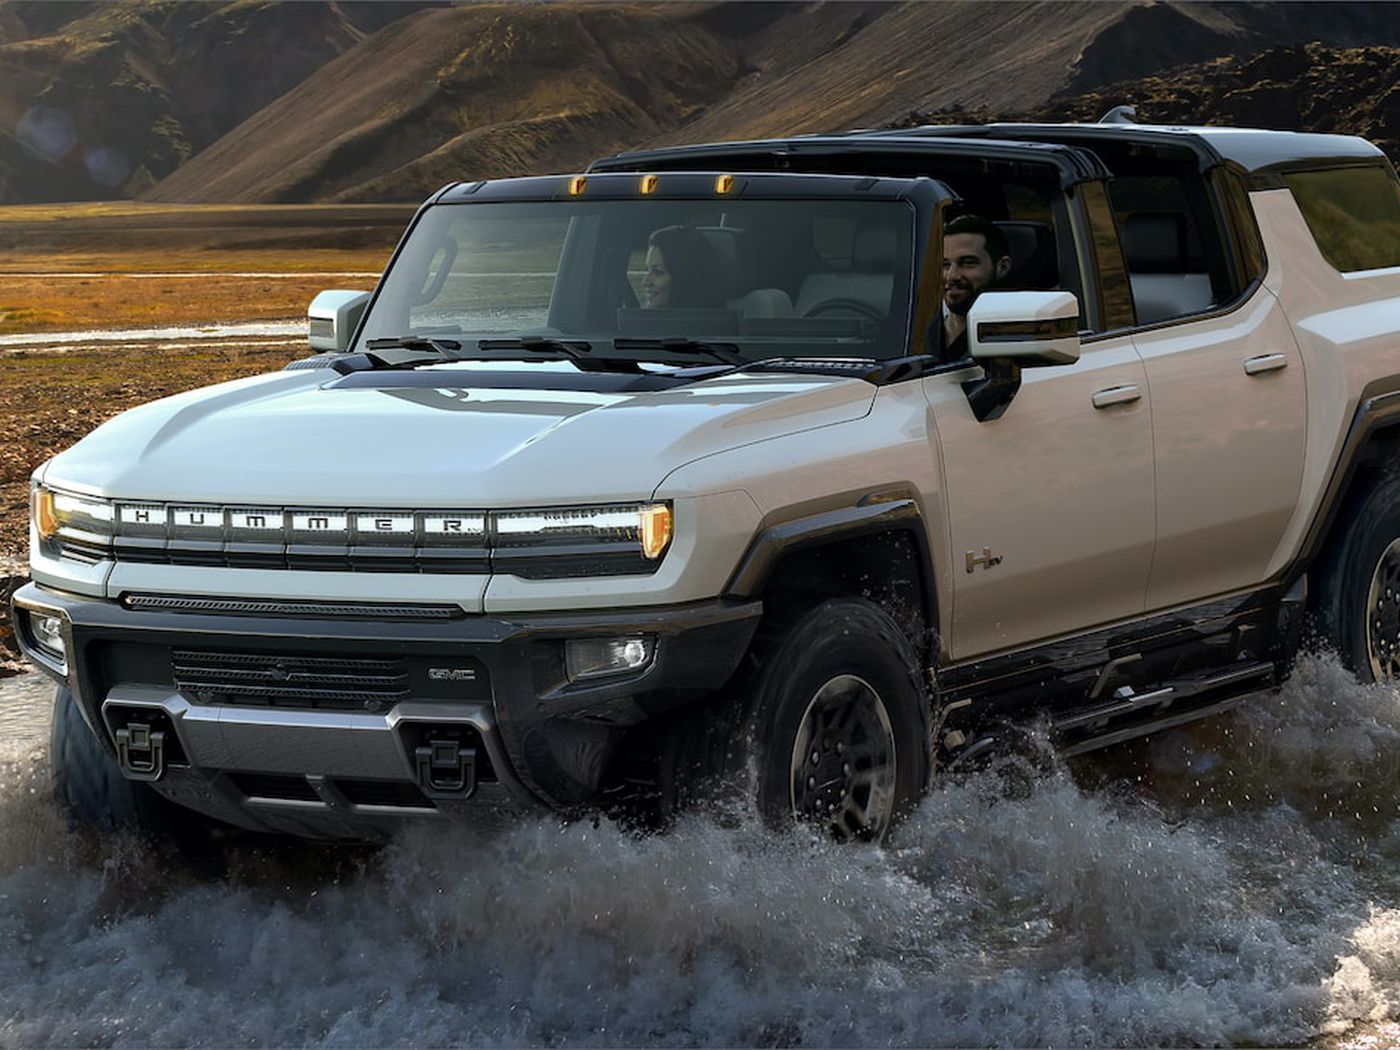 Hummer's new electric SUV can drive diagonally, with 300 miles of range and a $000 price tag